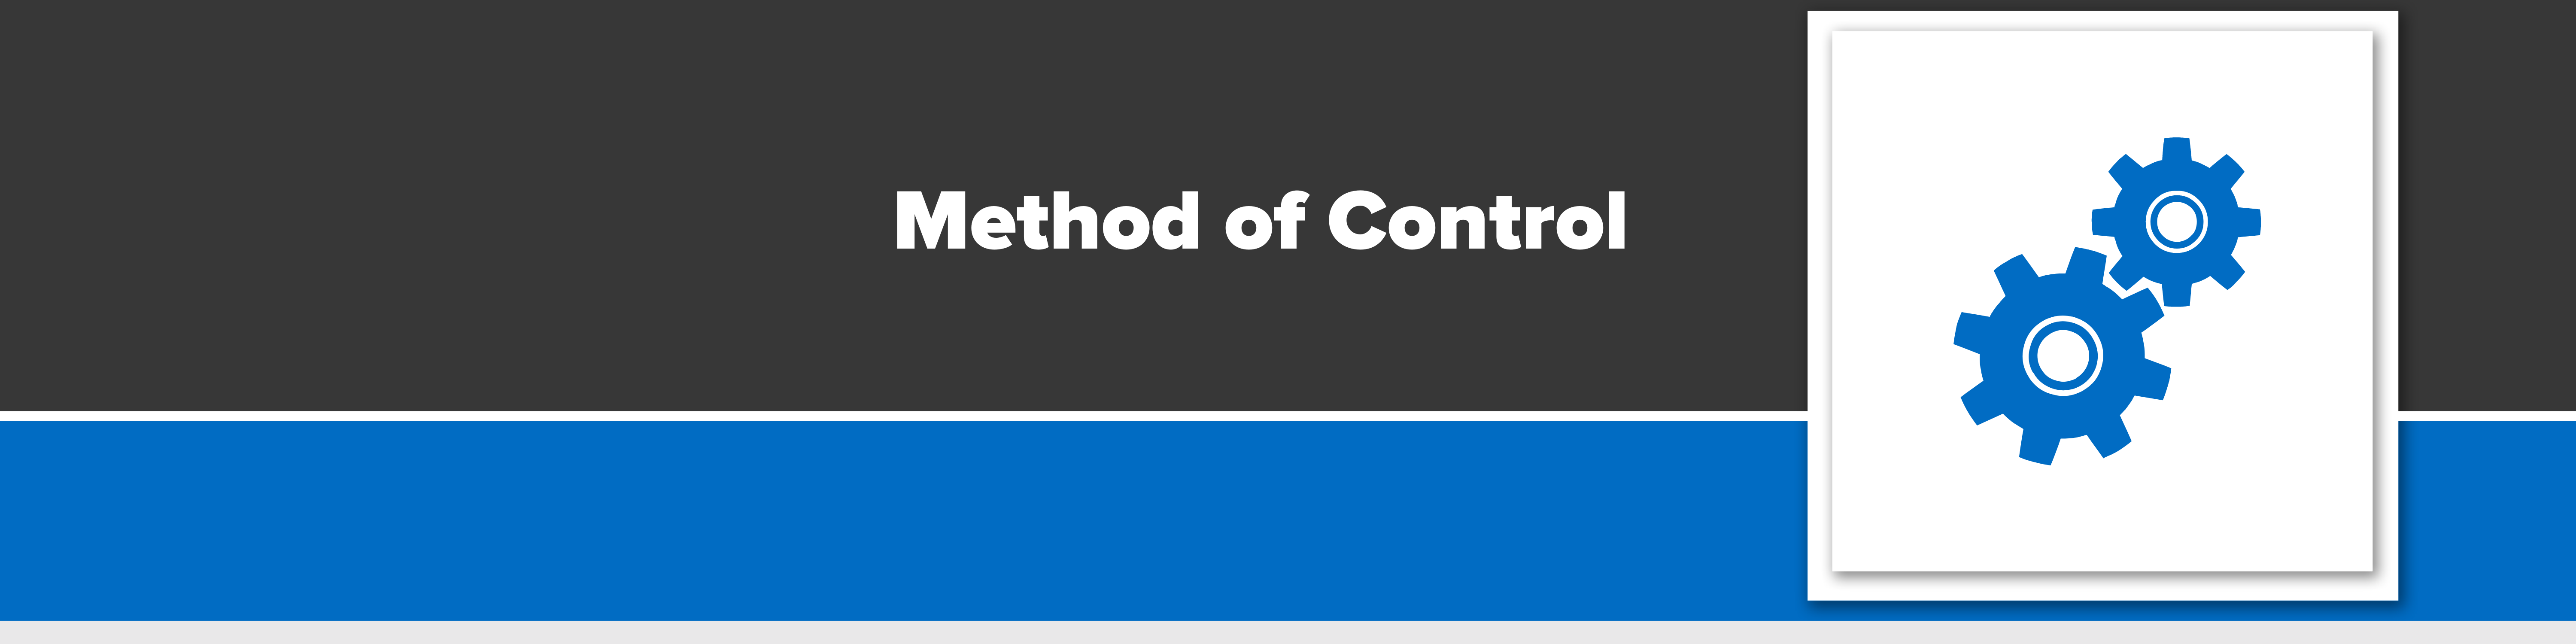 Header image with text "method of control."